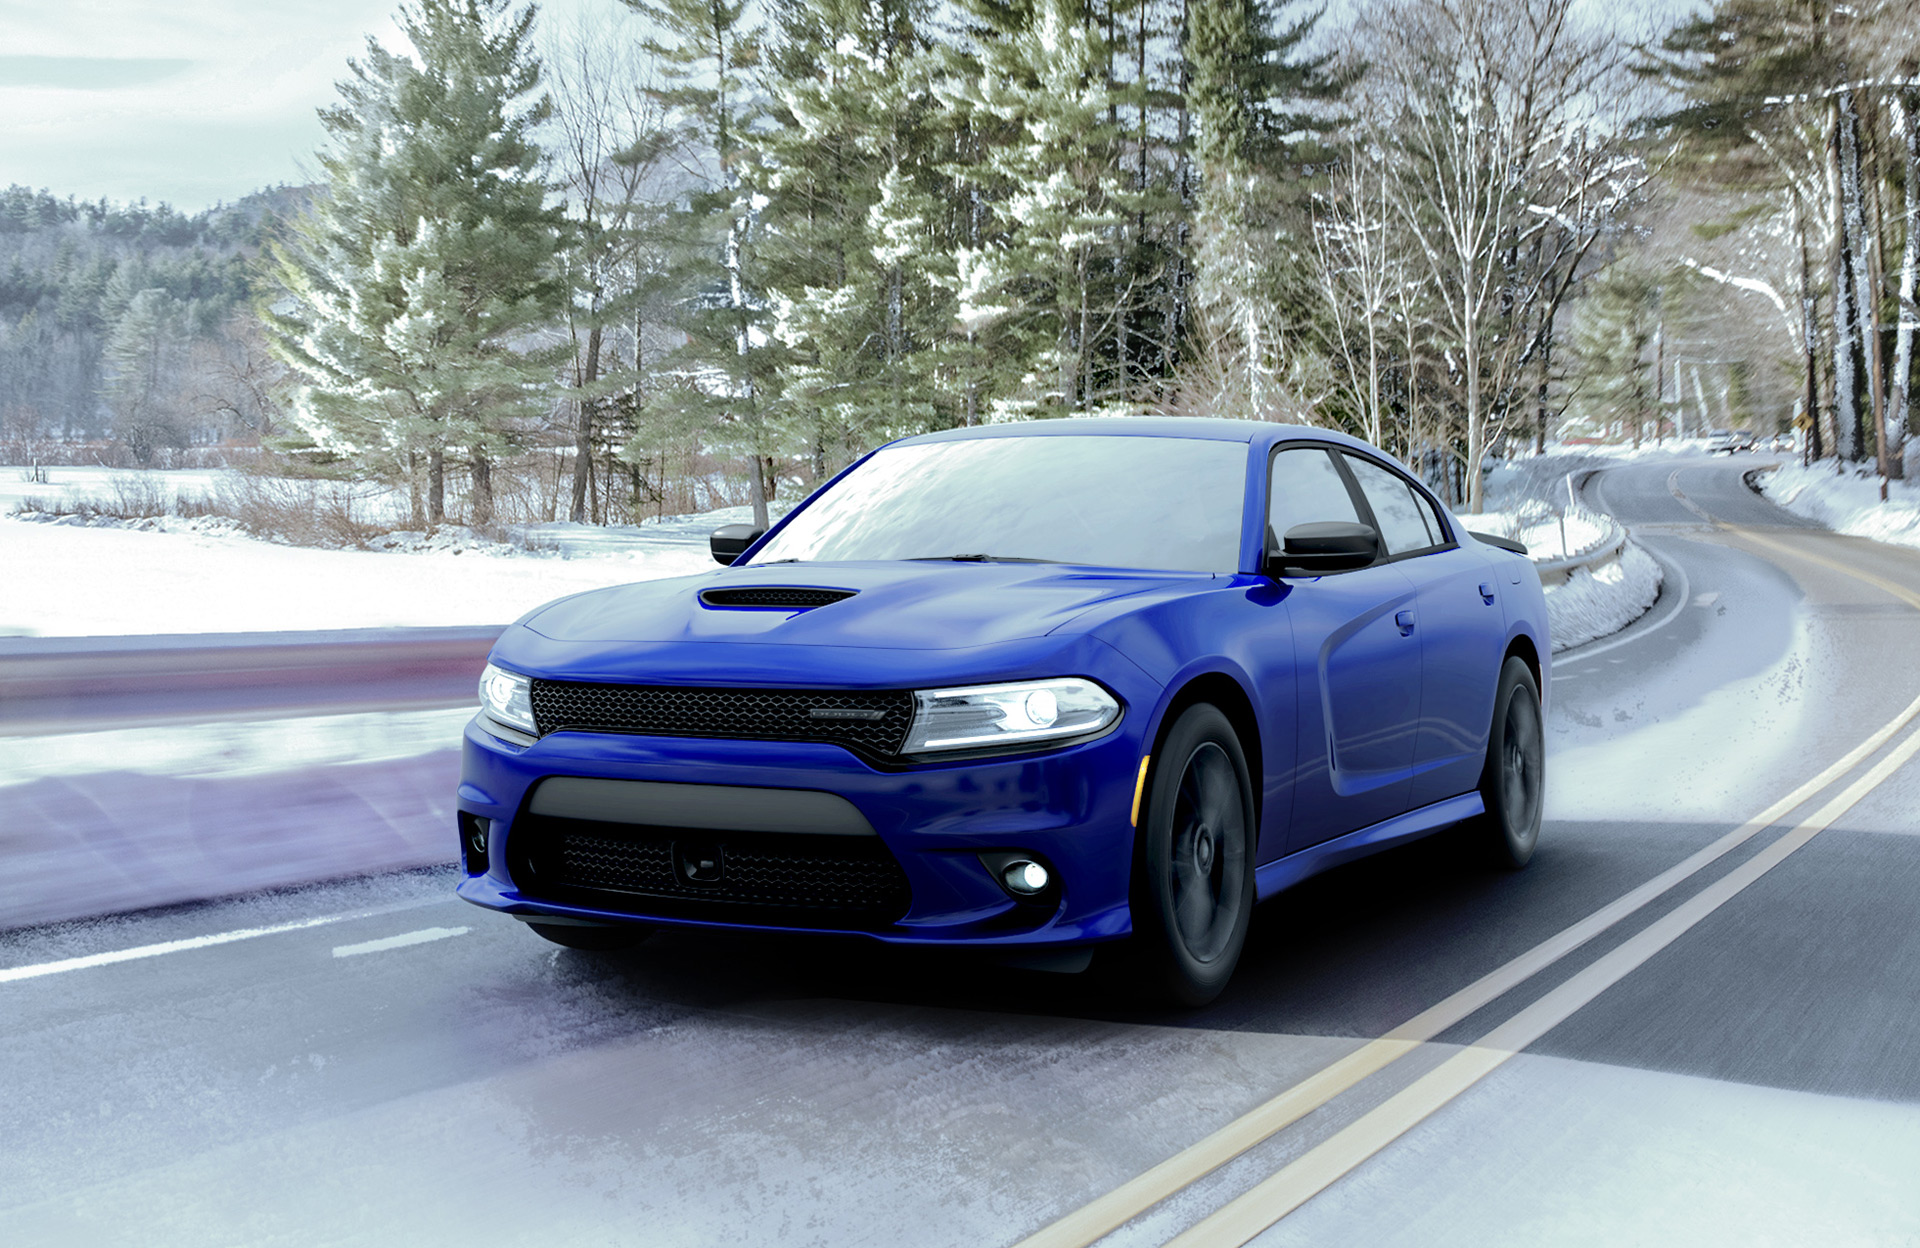 Dodge adds AWD to sporty Charger GT for 2020